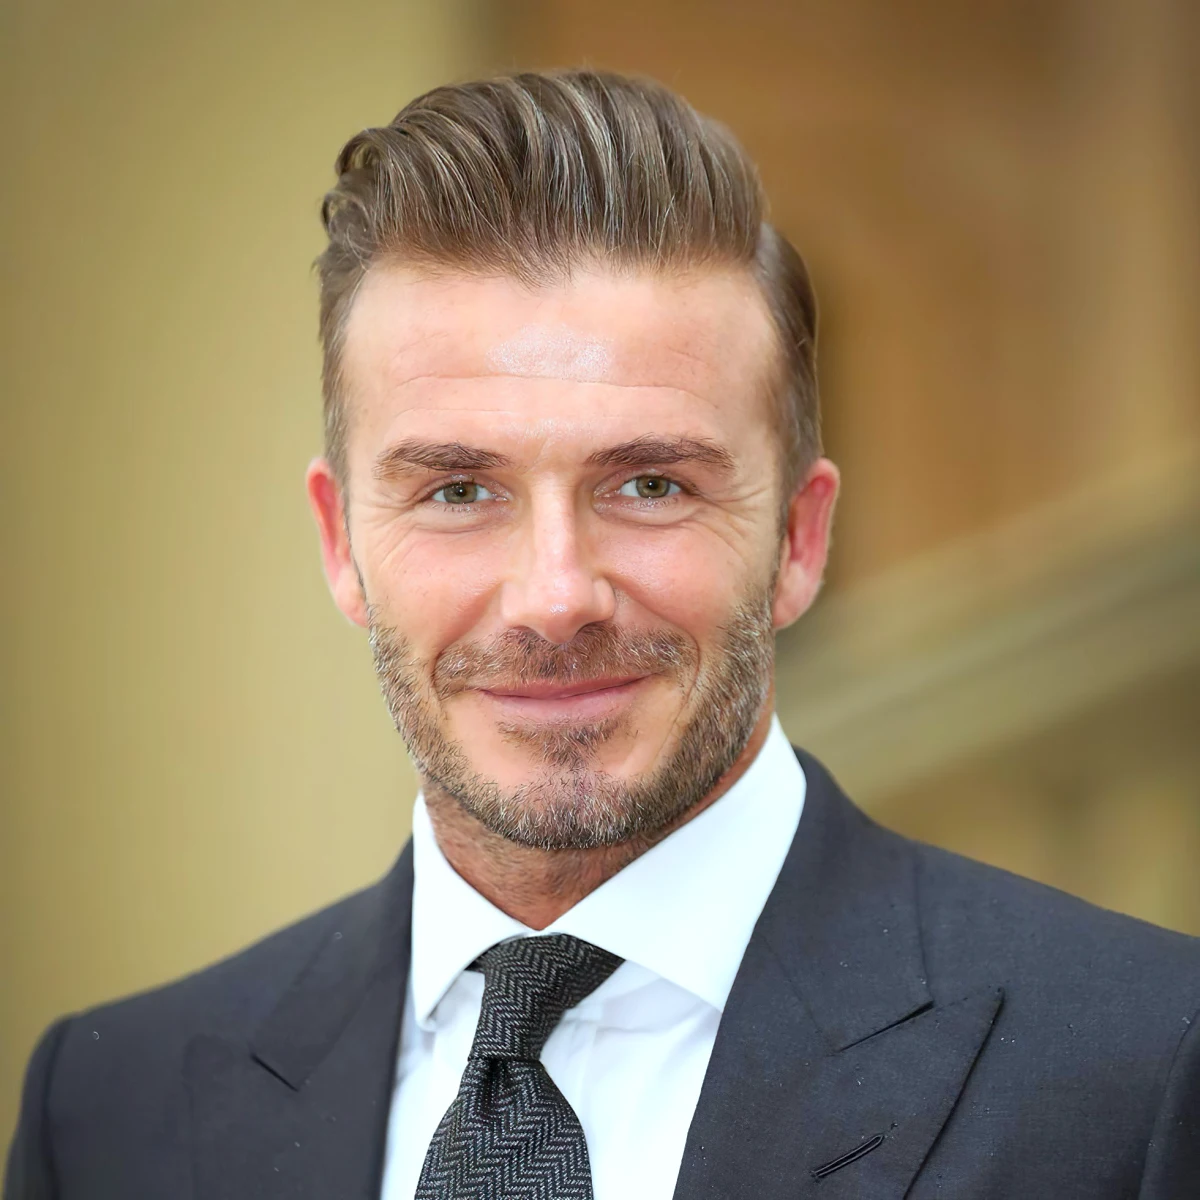 david beckham arrives for the queens young leaders awards news photo 542447806 1551884952